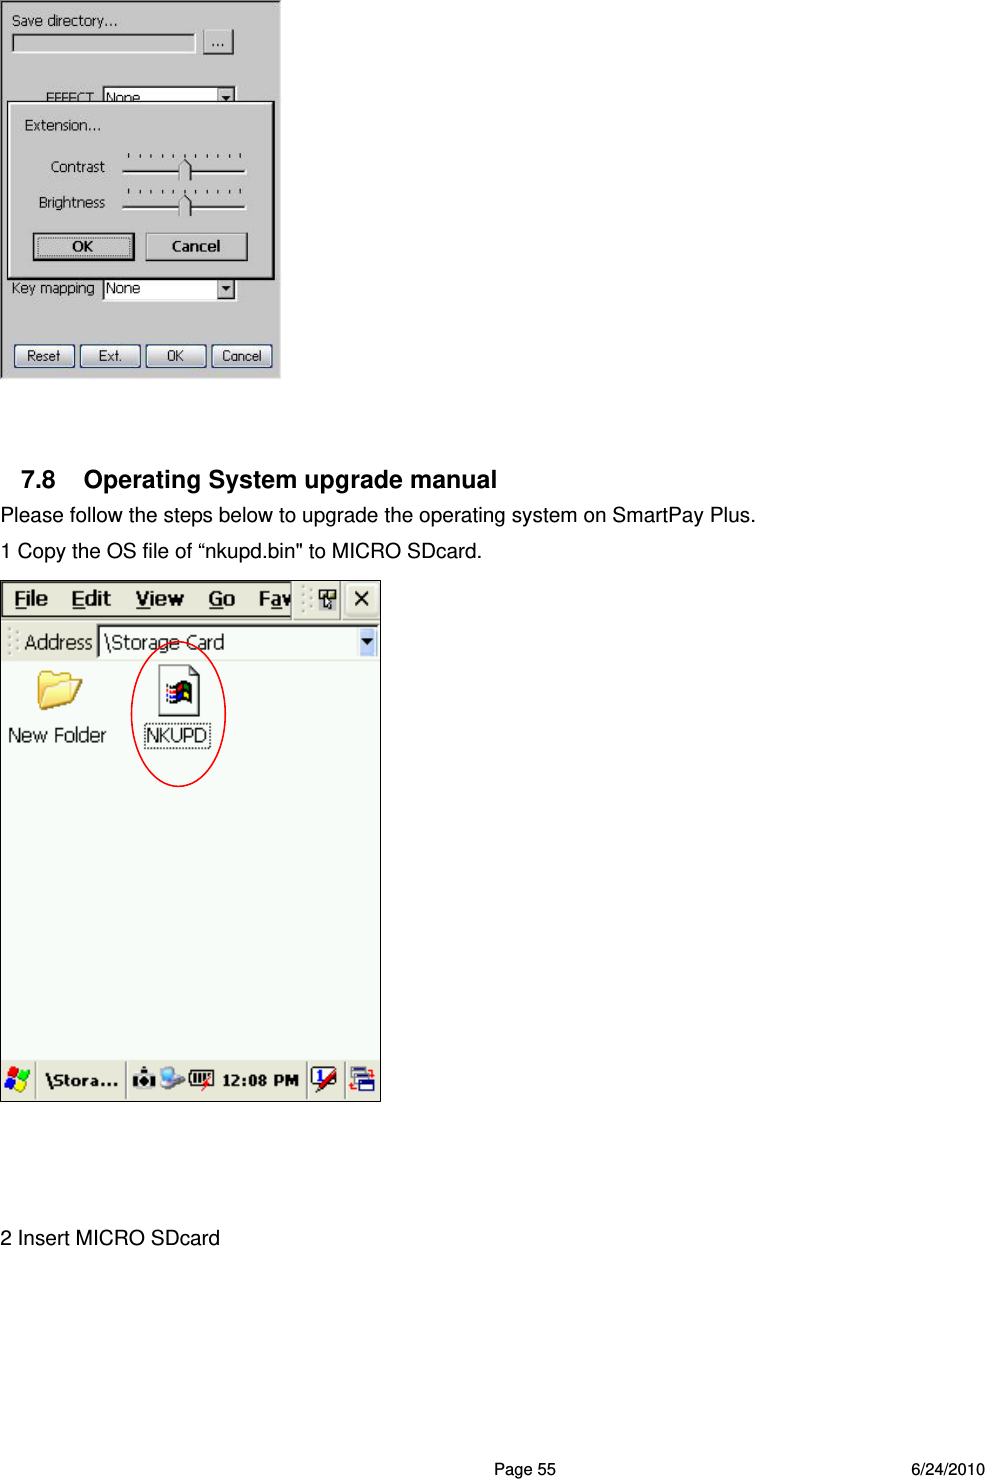  Page 55 6/24/2010    7.8  Operating System upgrade manual   Please follow the steps below to upgrade the operating system on SmartPay Plus. 1 Copy the OS file of “nkupd.bin&quot; to MICRO SDcard.     2 Insert MICRO SDcard 